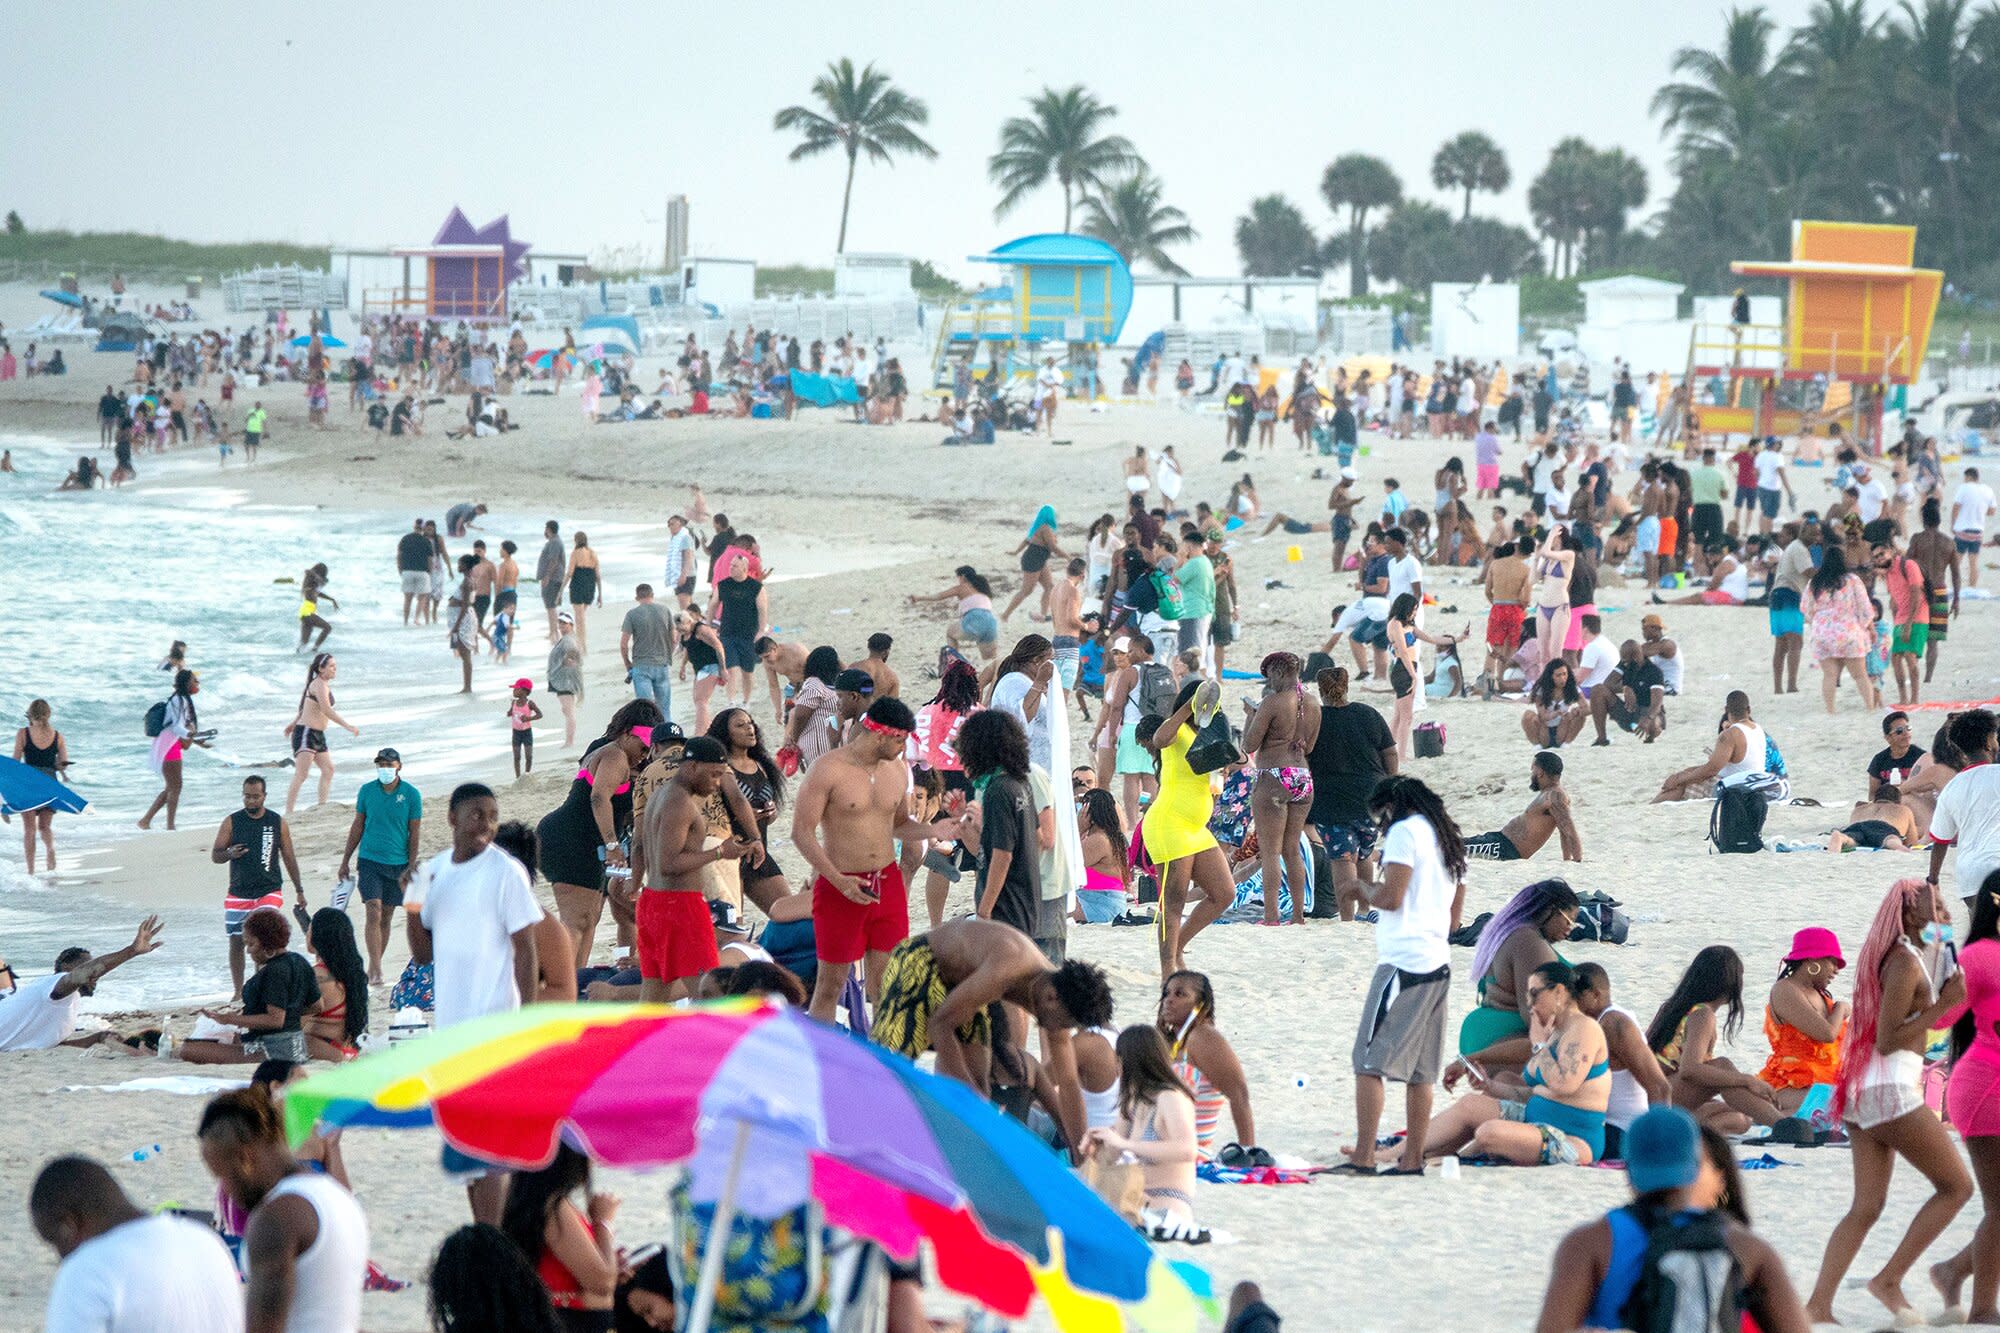 Miami Beach Declares State of Emergency, Imposes Curfew Due to